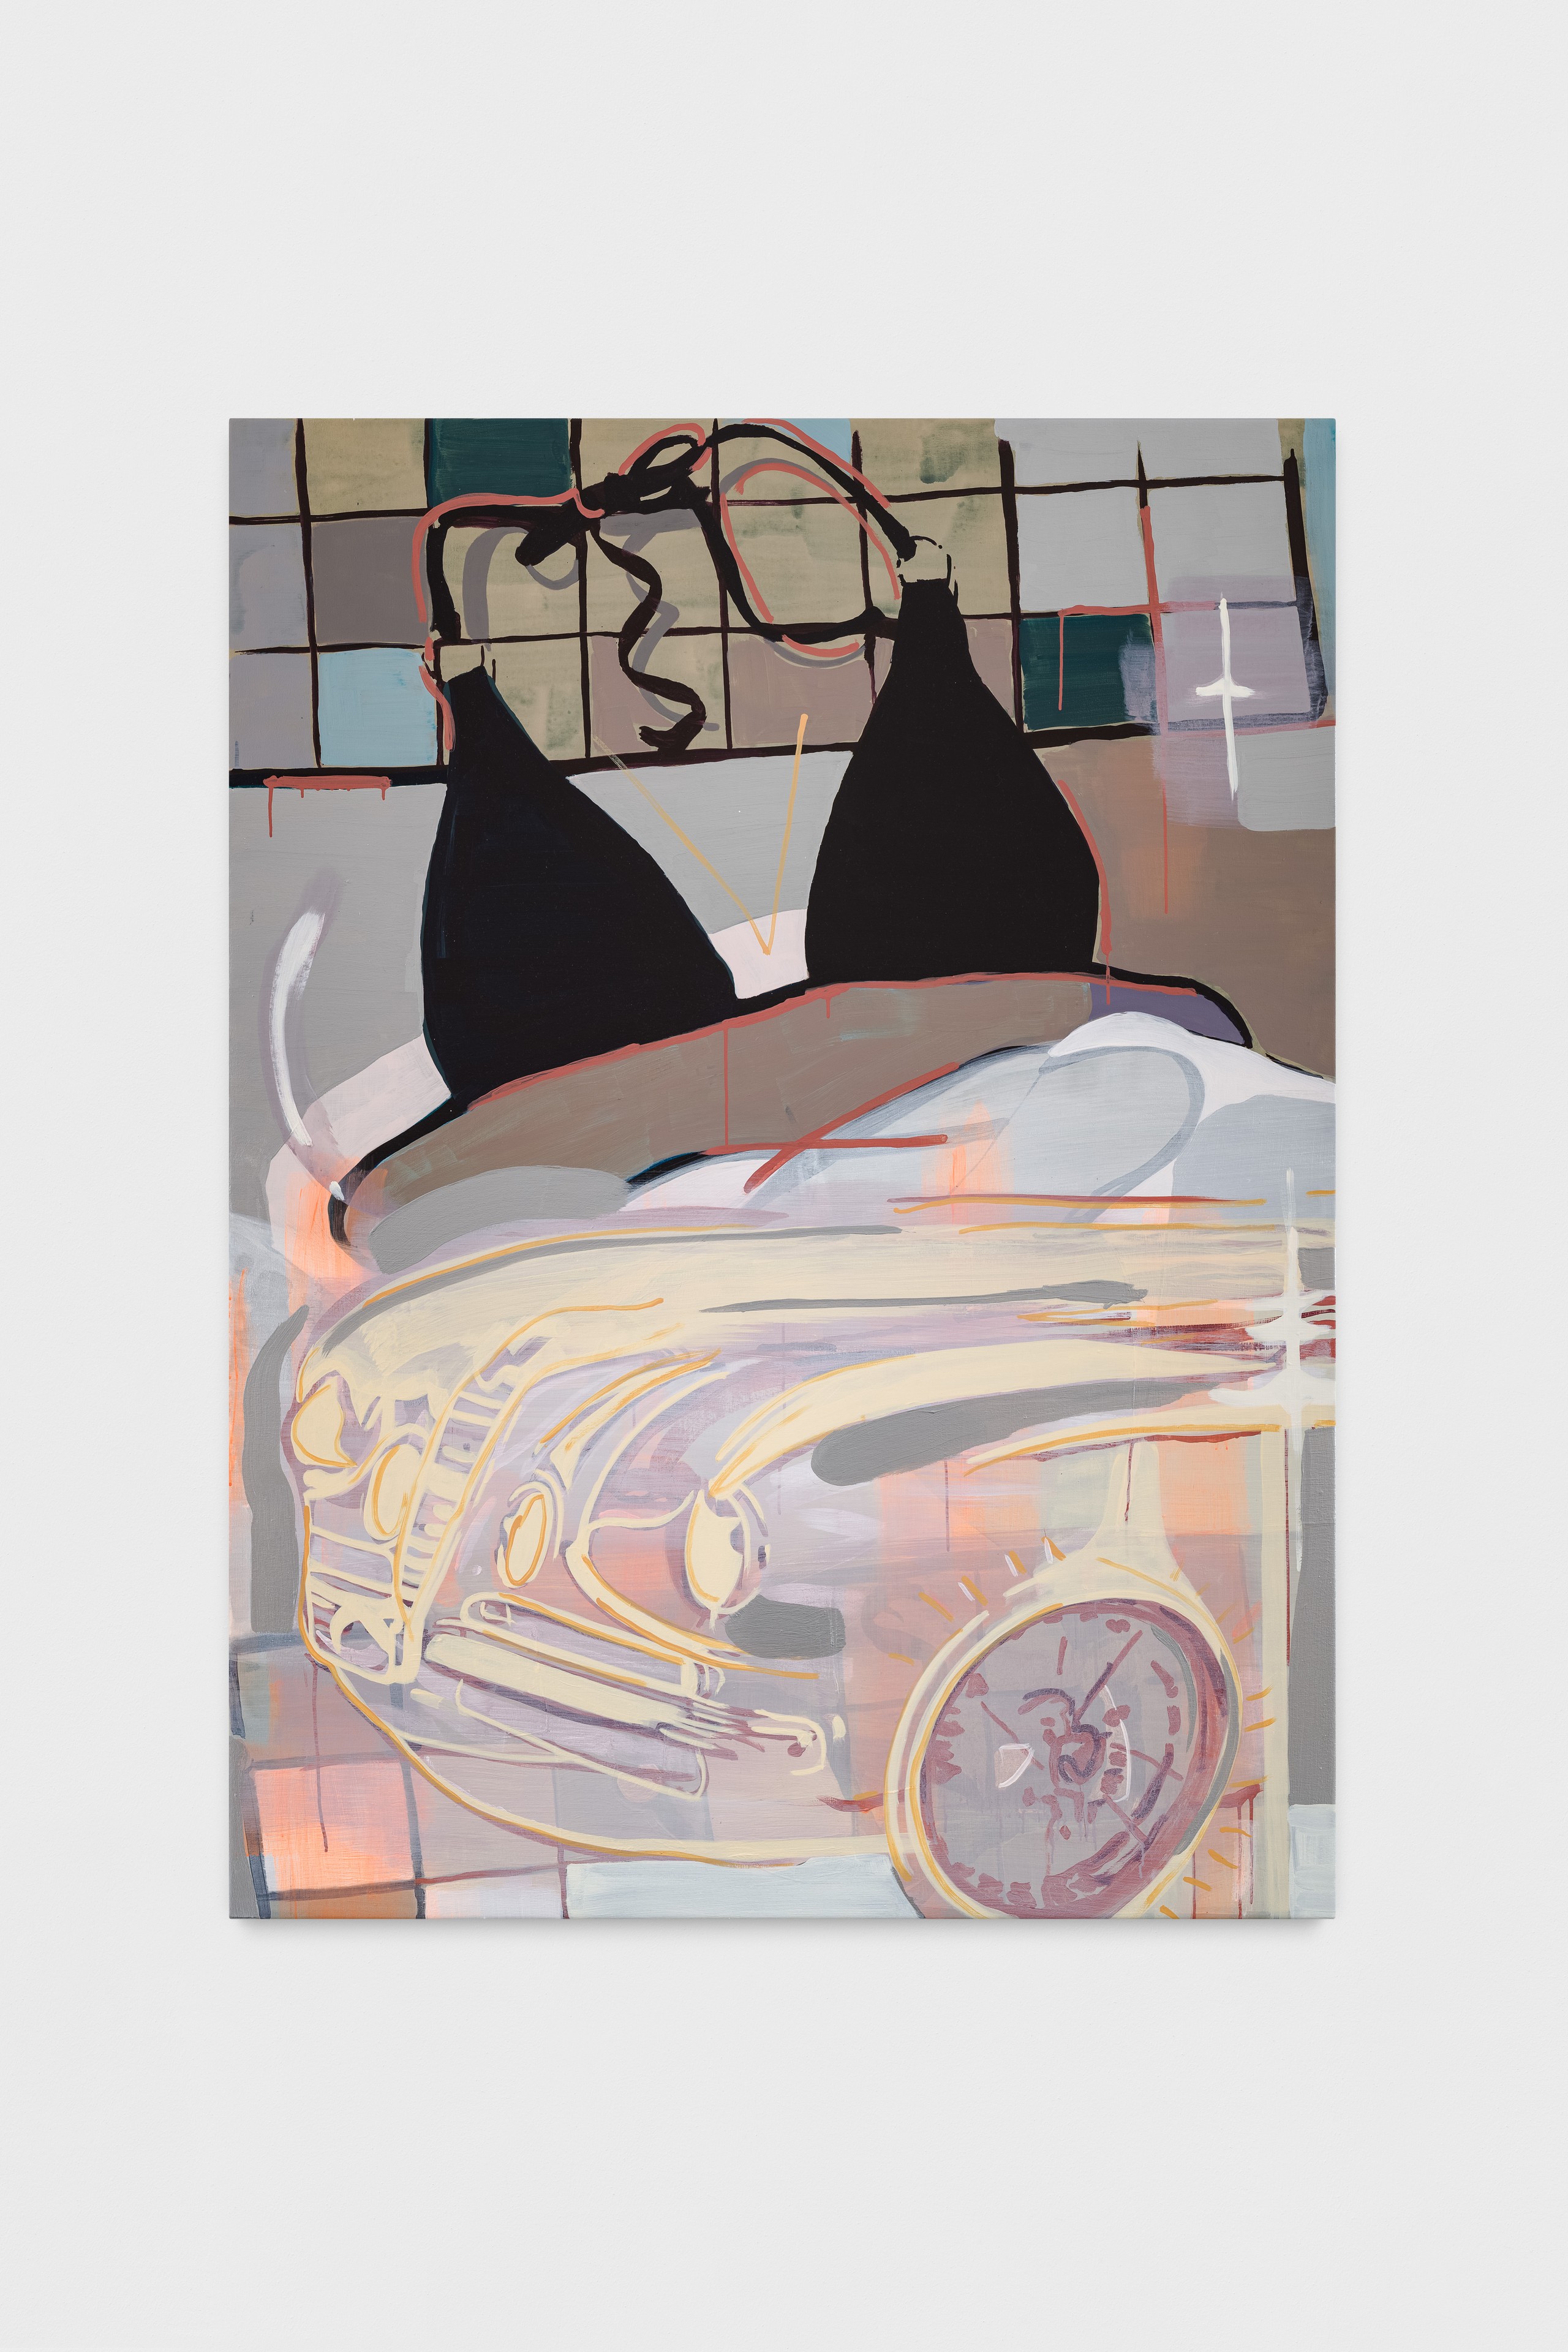 Andrea Fourchy, Color Me Your Car, 2022, oil and acrylic on canvas, 175.3 x 129.5 x 2.5 cm